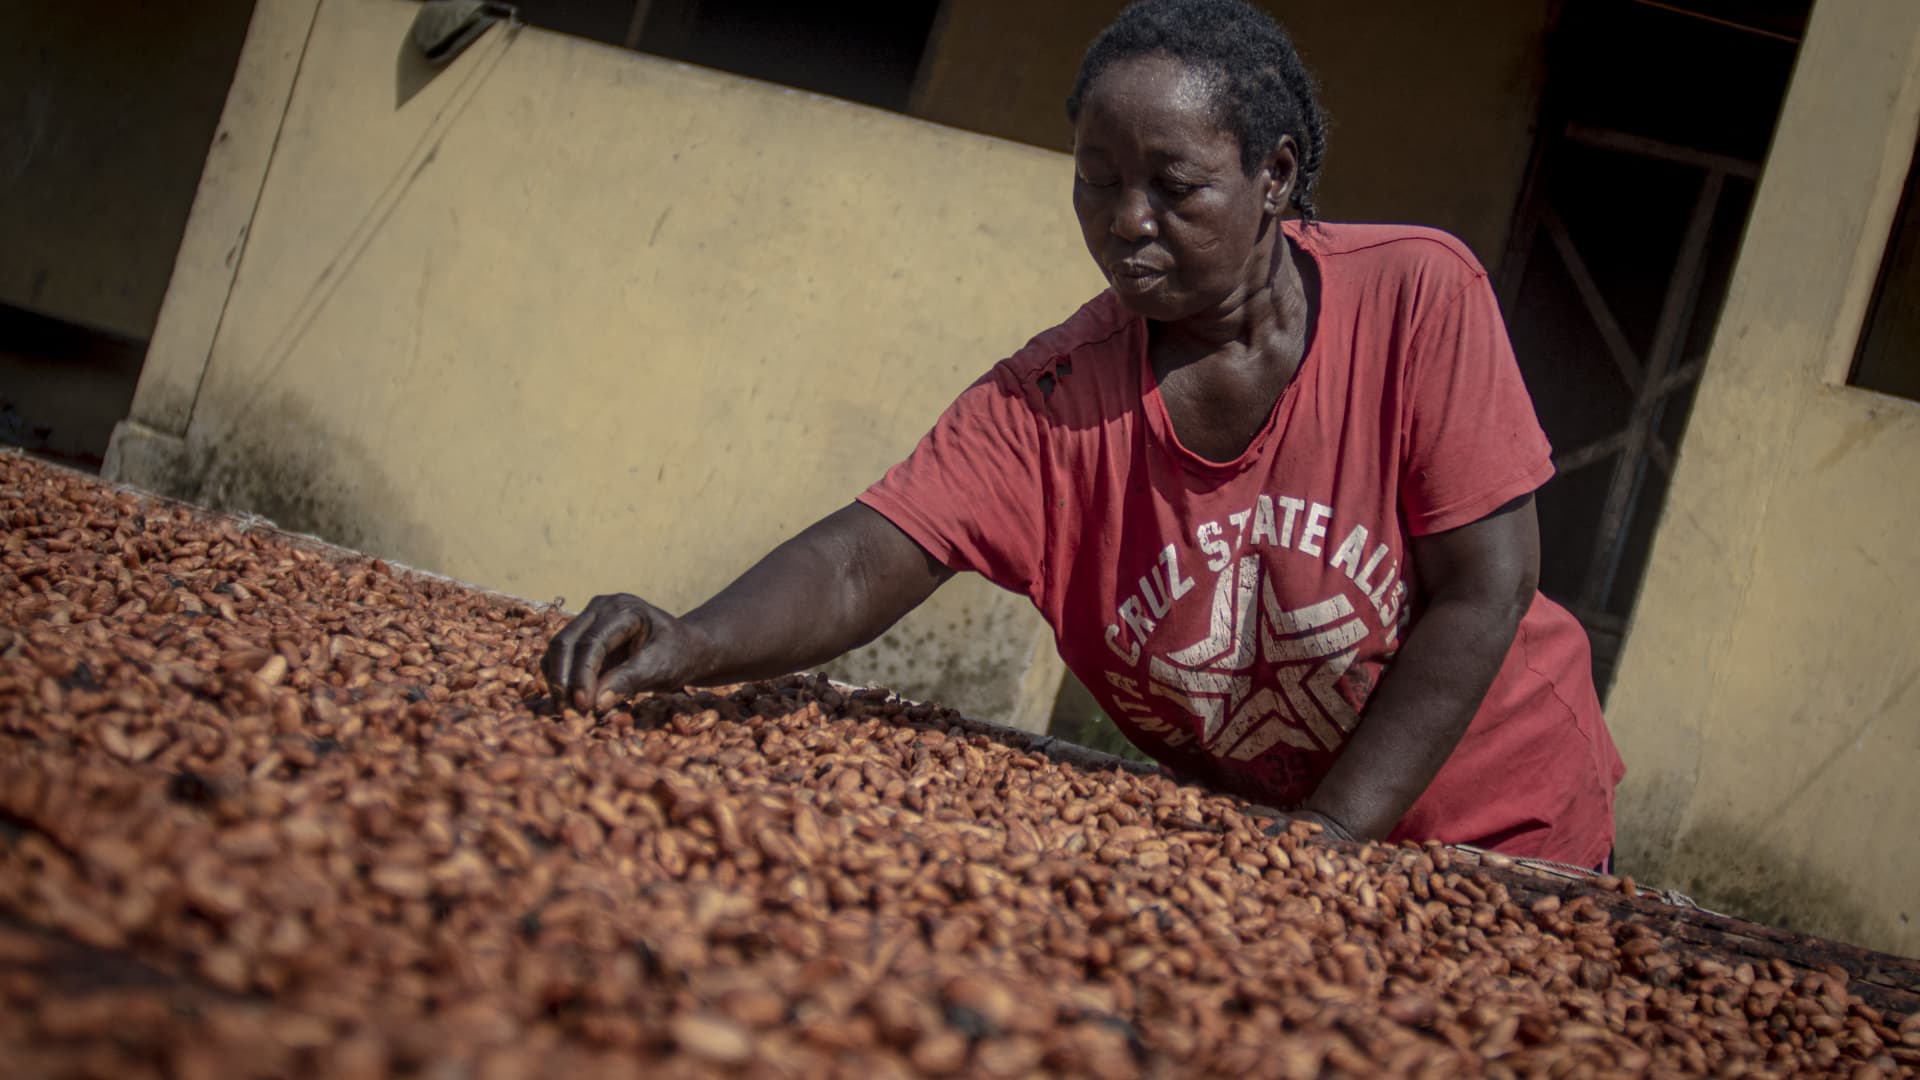 Cocoa farmers face mounting challenges as El Nino rages on